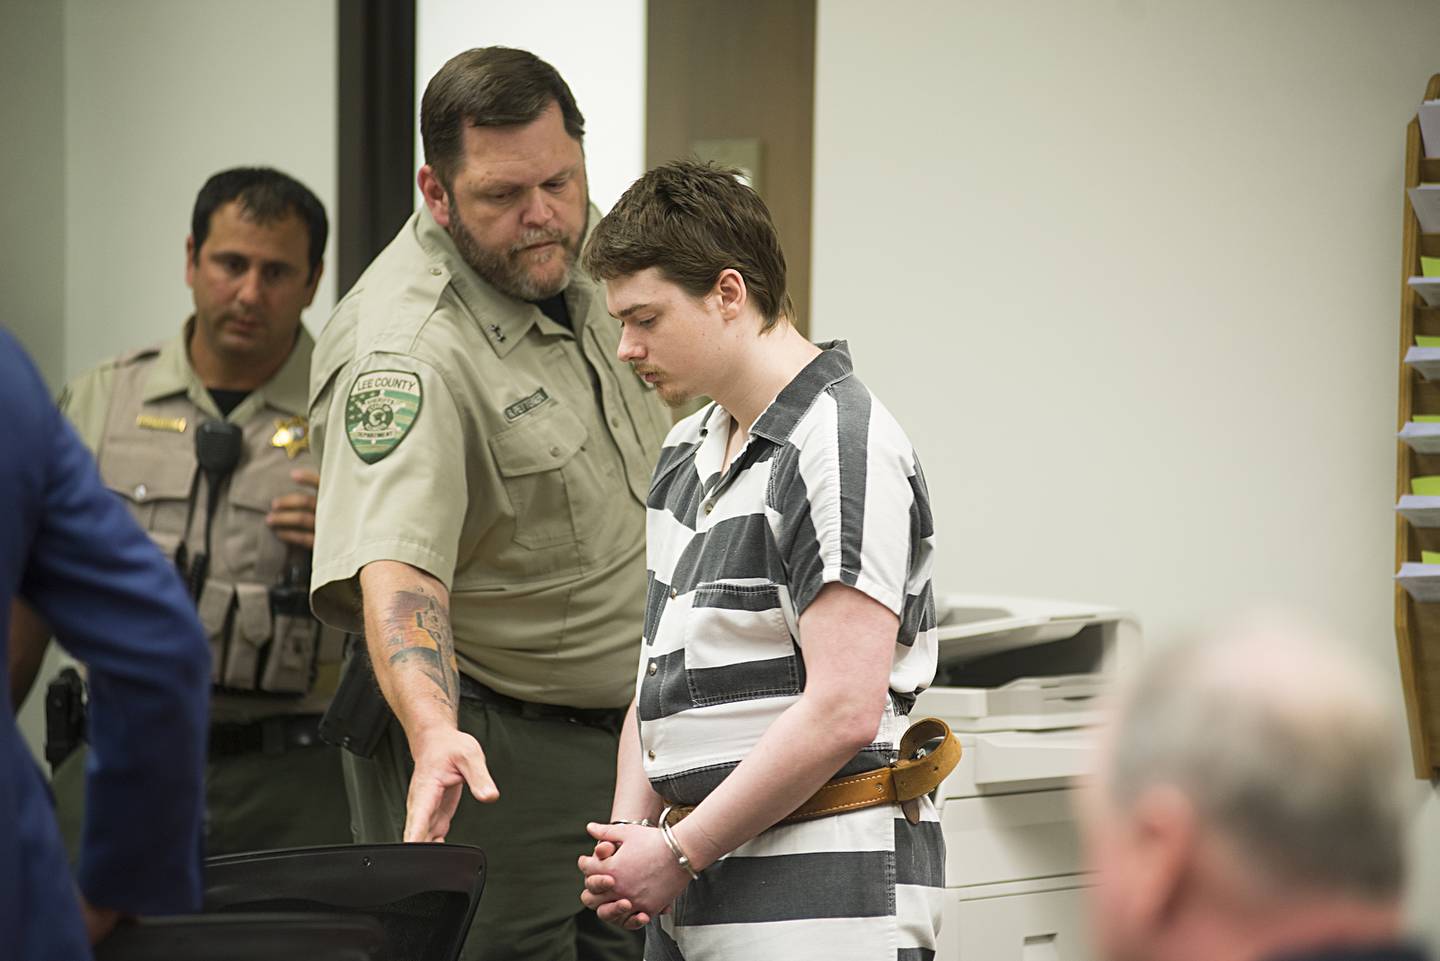 Dixon High School shooter Matthew Milby enters a Lee County courtroom Thursday, July 14, 2022. Milby pled guilty to two Class X felonies.